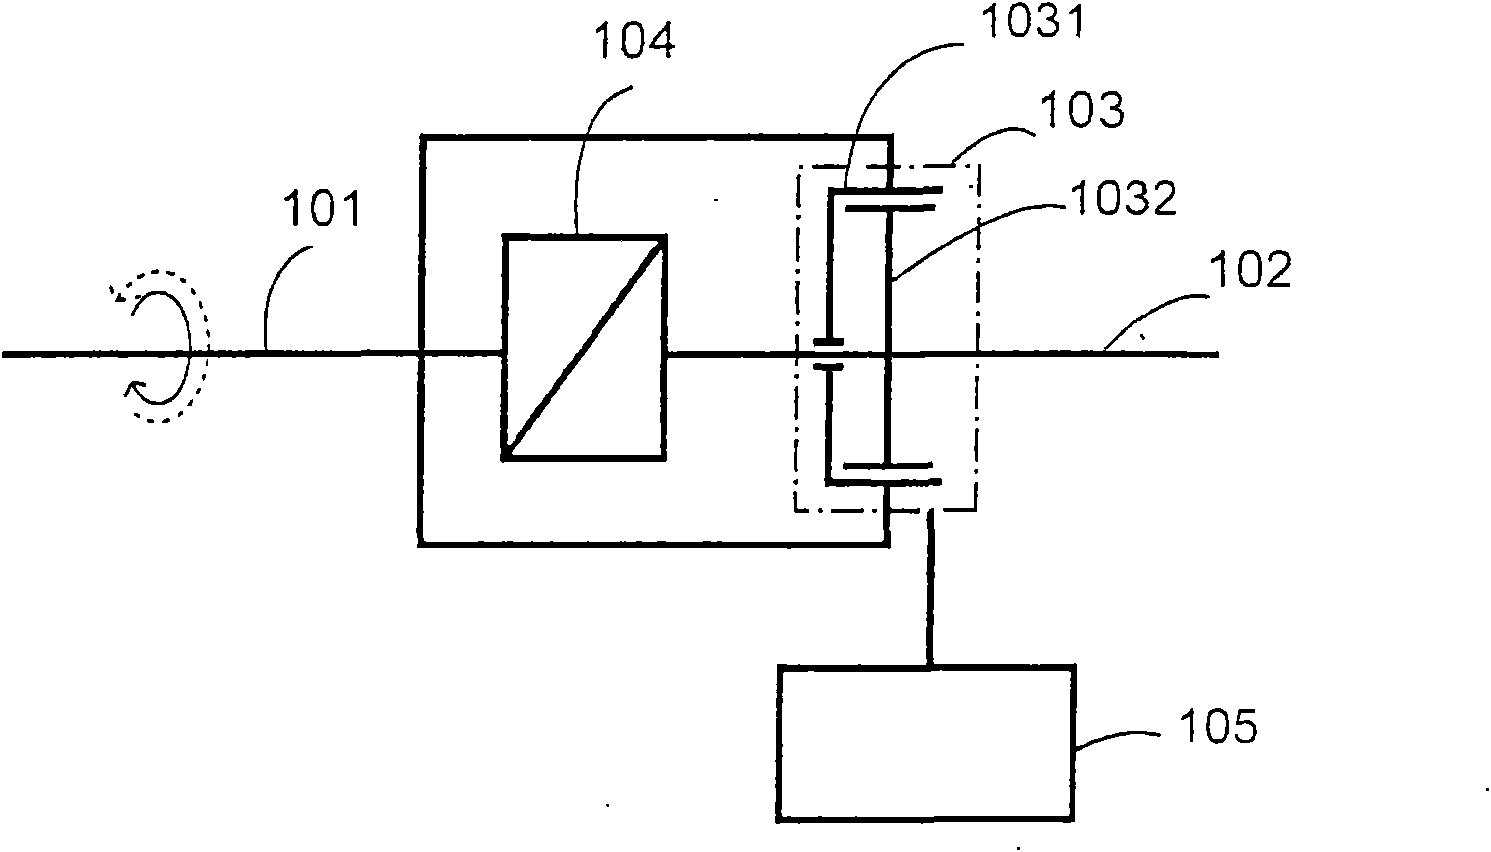 Bidirectional coupling device with same or different transmission characteristics